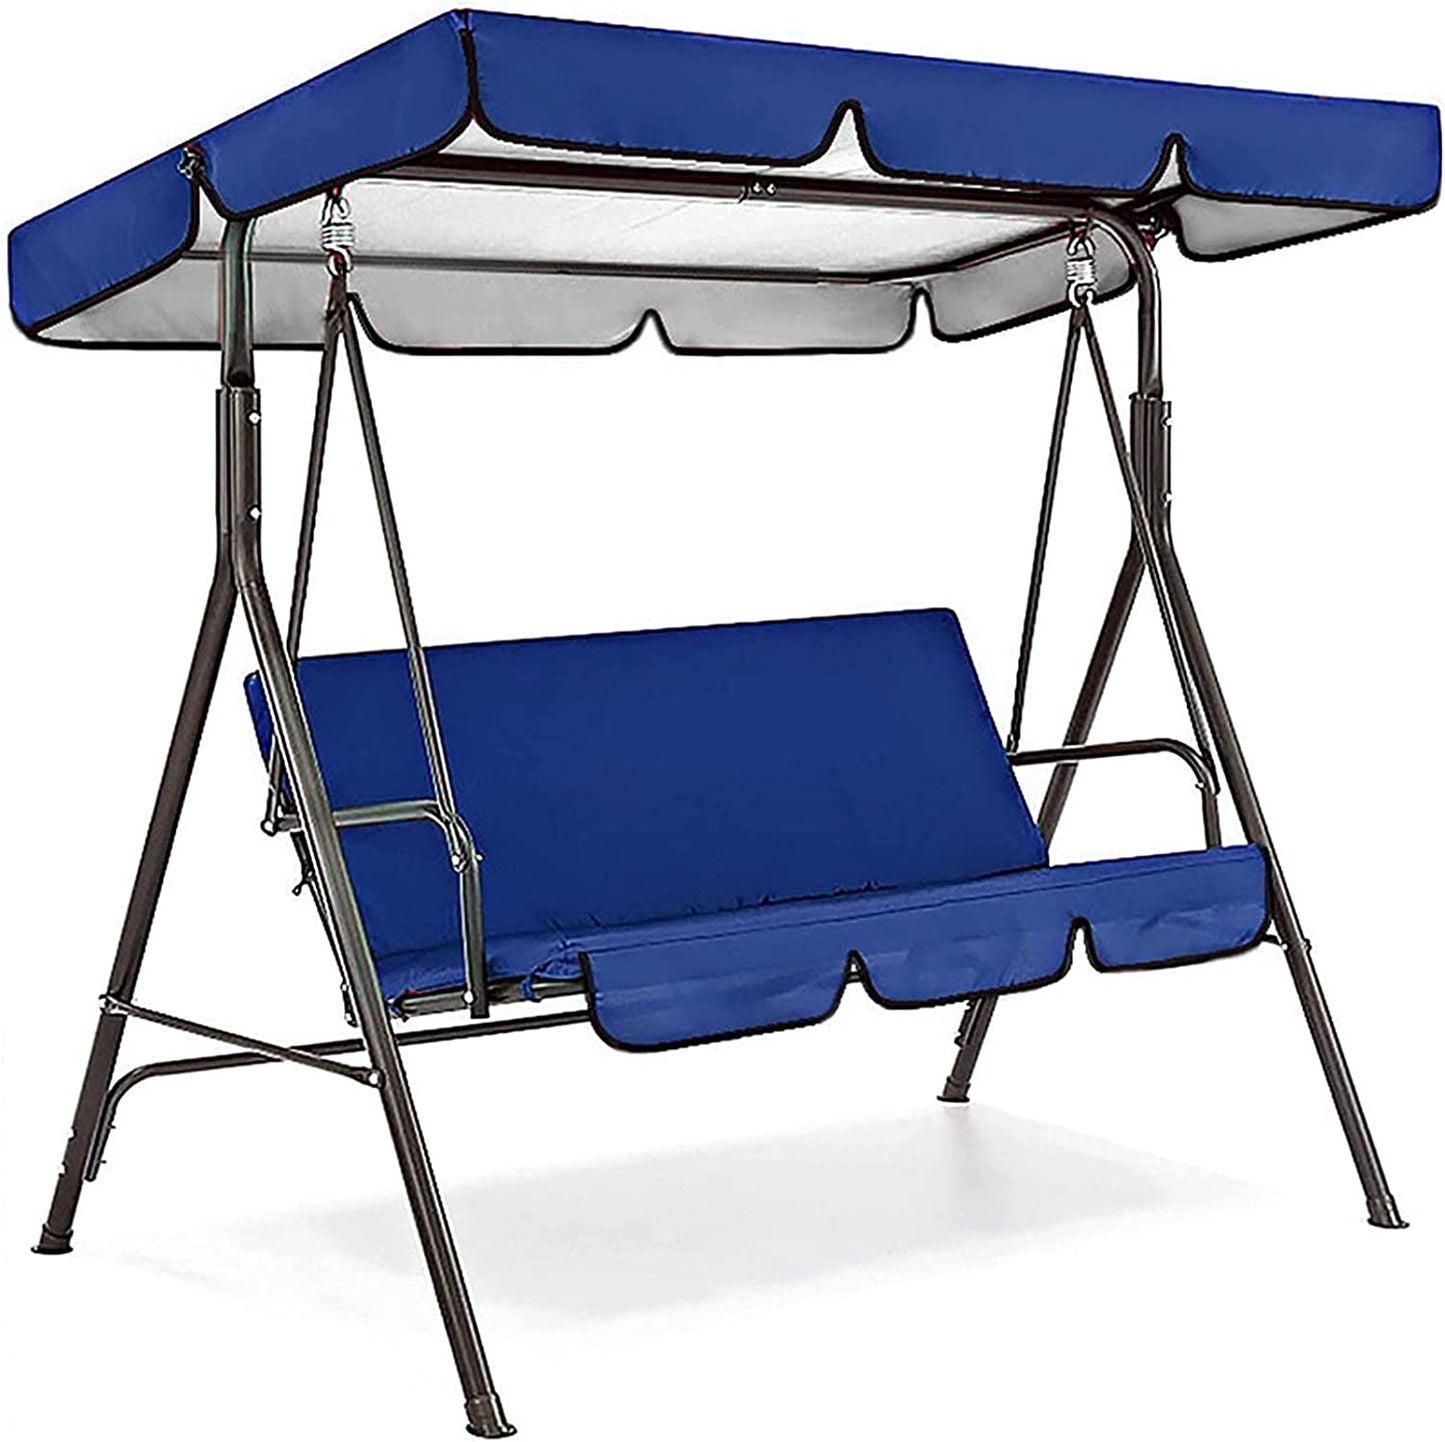 Patio Swing Canopy Waterproof Top Cover Set, Replacement Canopy Cover for Swing Chair Awning Glider 2/3-Seater, Outdoor Garden Furniture Covers All Weather Protection (Blue, Three-Seater)